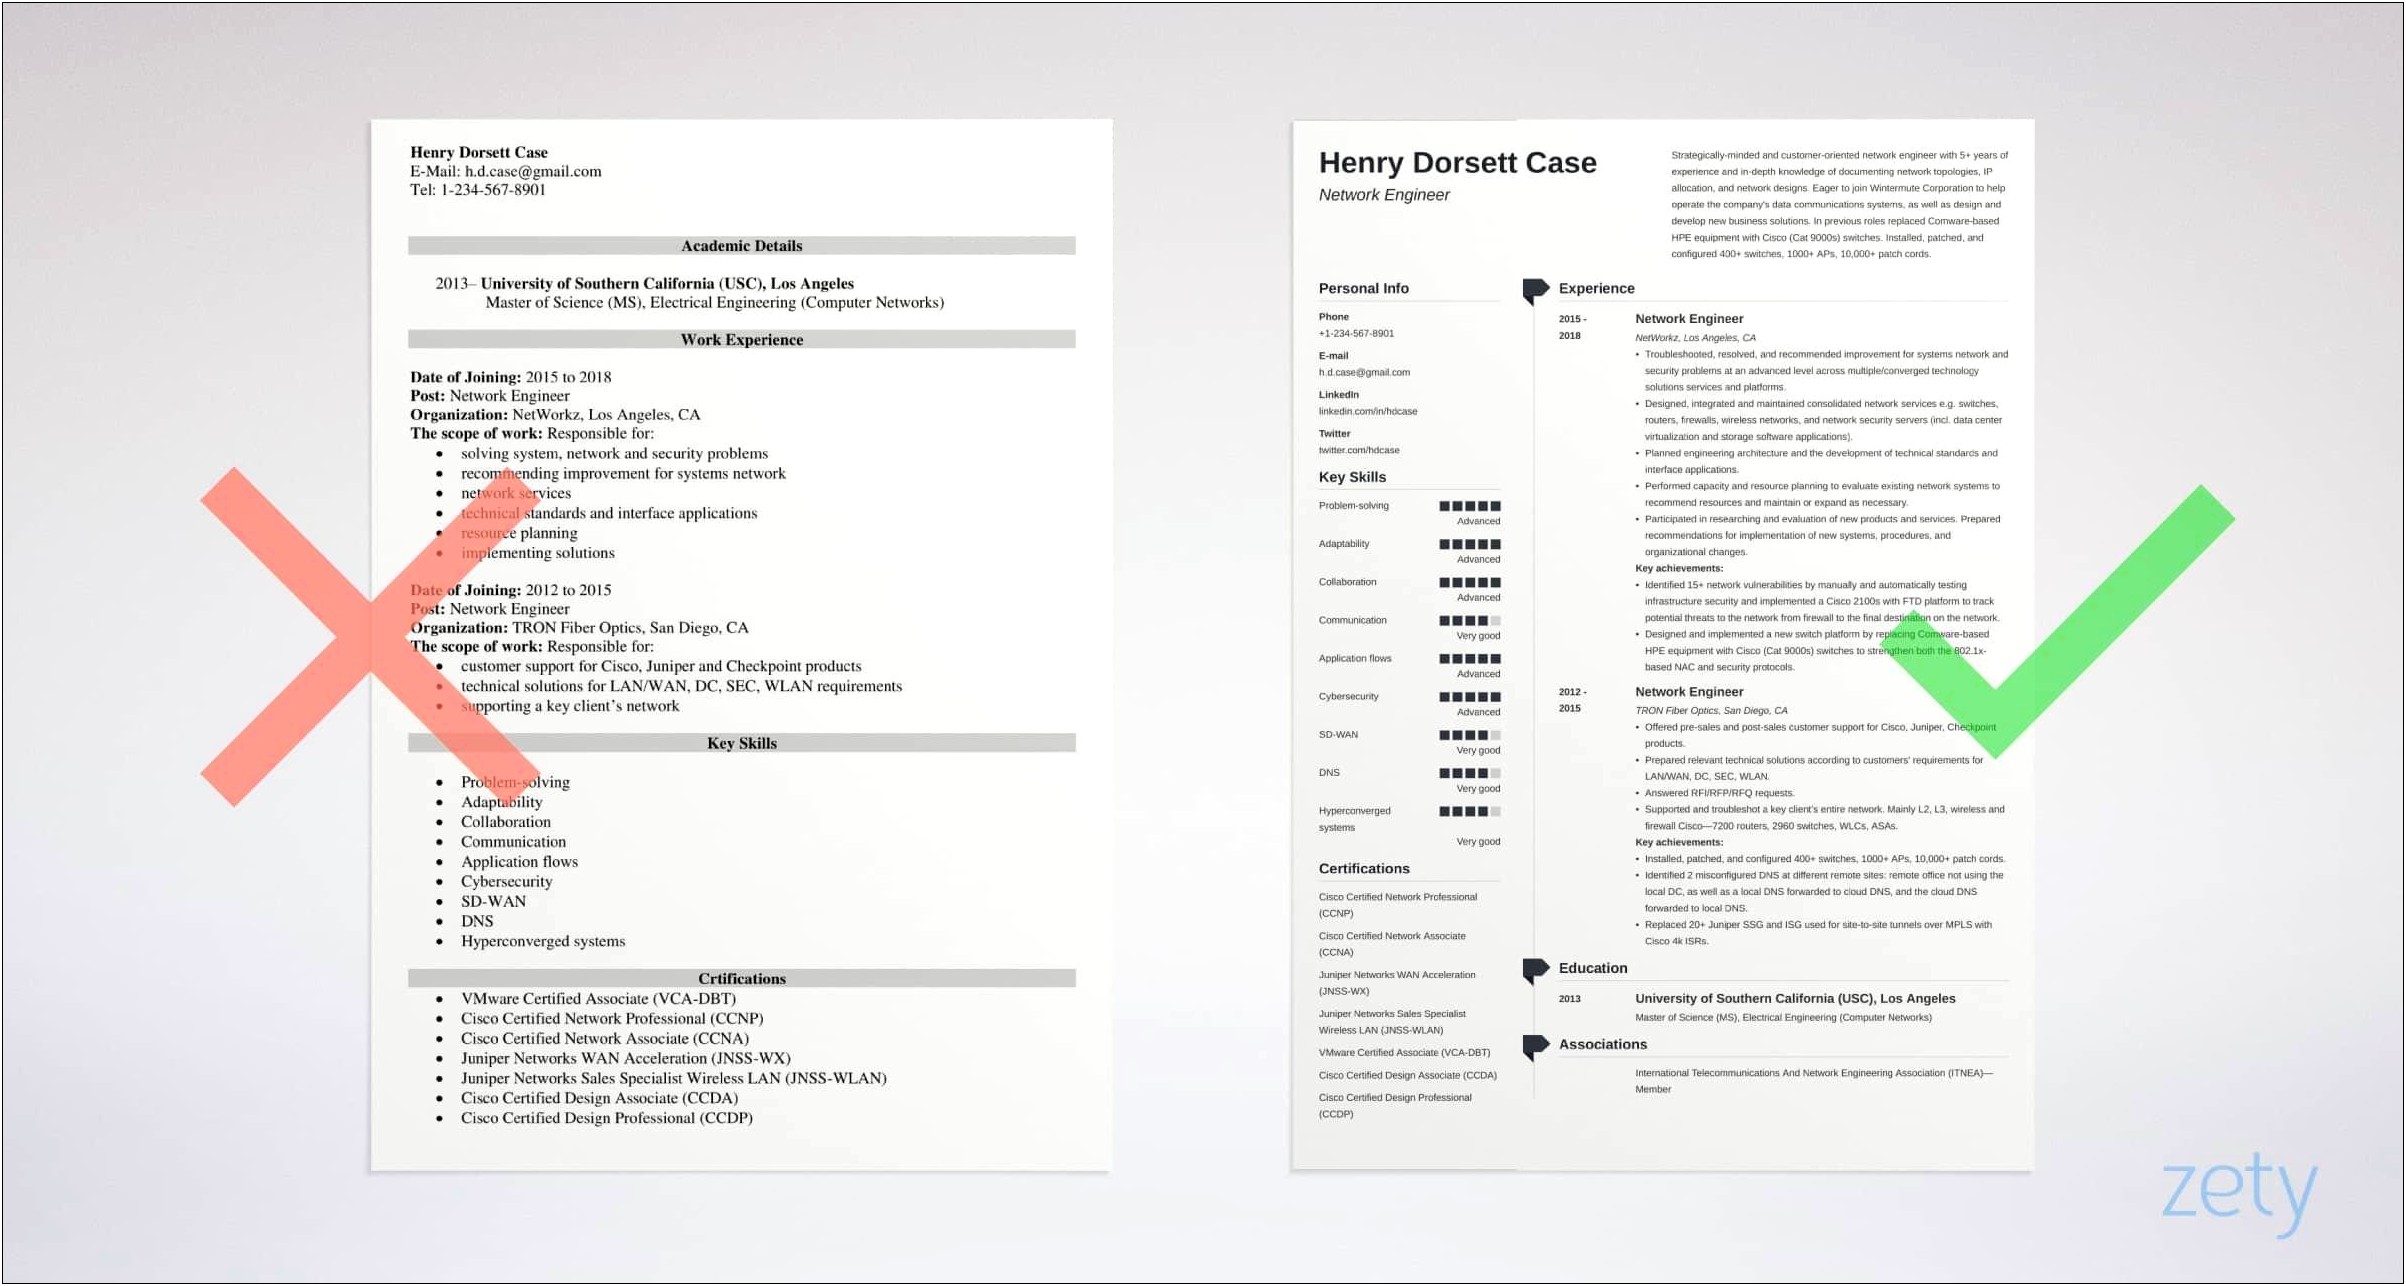 Resume For Computer Jobs In Calfornia